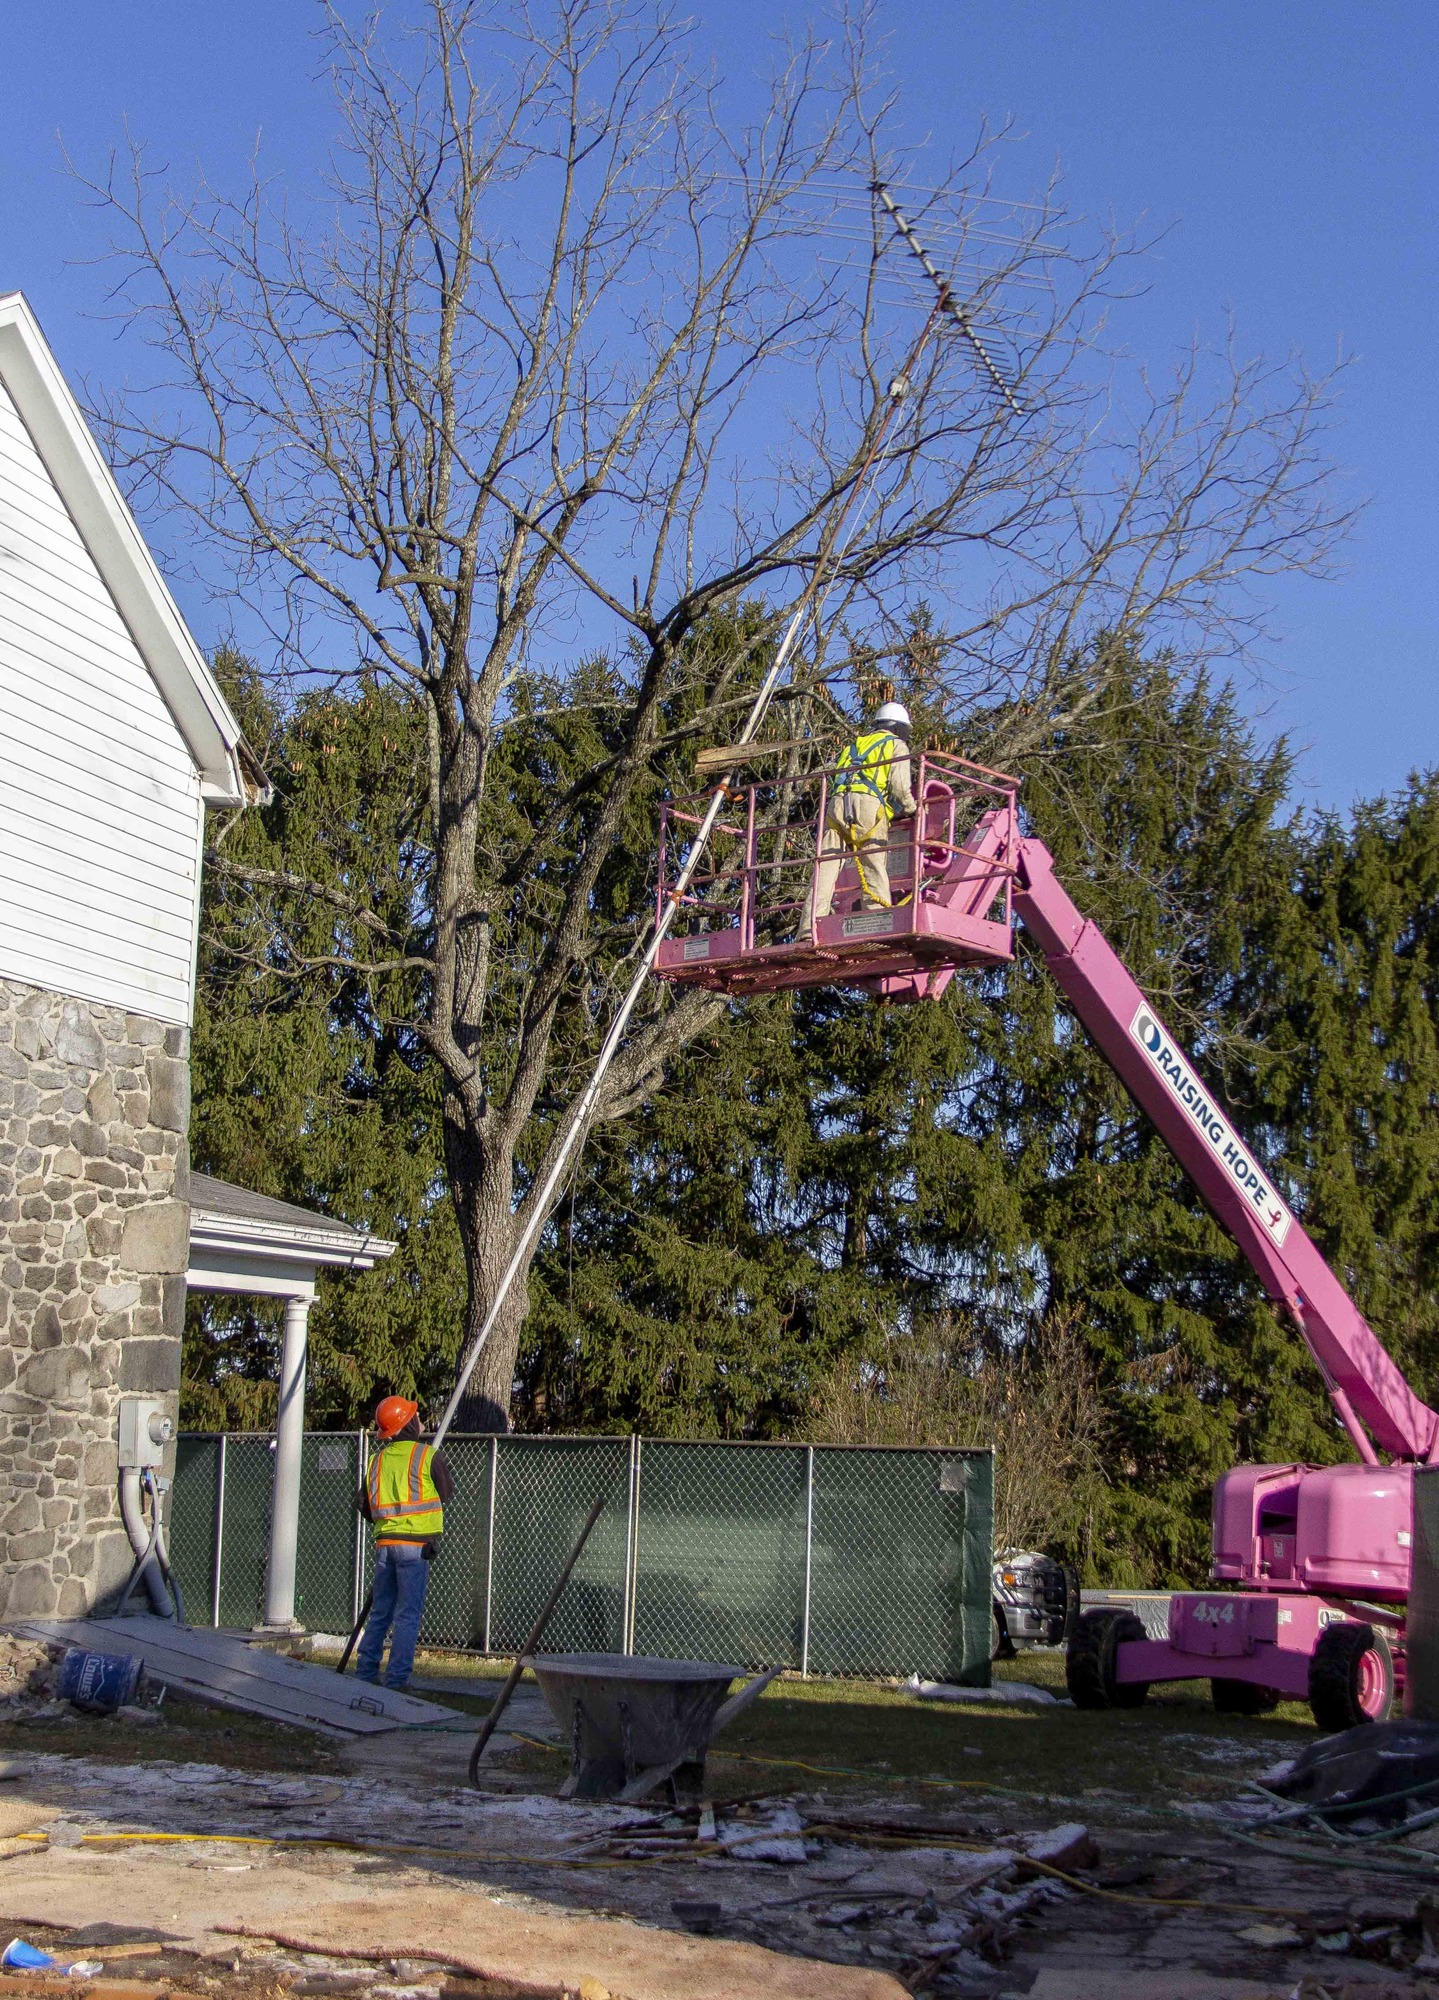 Two construction workers begin the process of removing the old TV antenna from the side of the house. One worker is holding the antenna at ground level and the other is navigating the atenna down through a tree while harnessed into the pink construction lift.